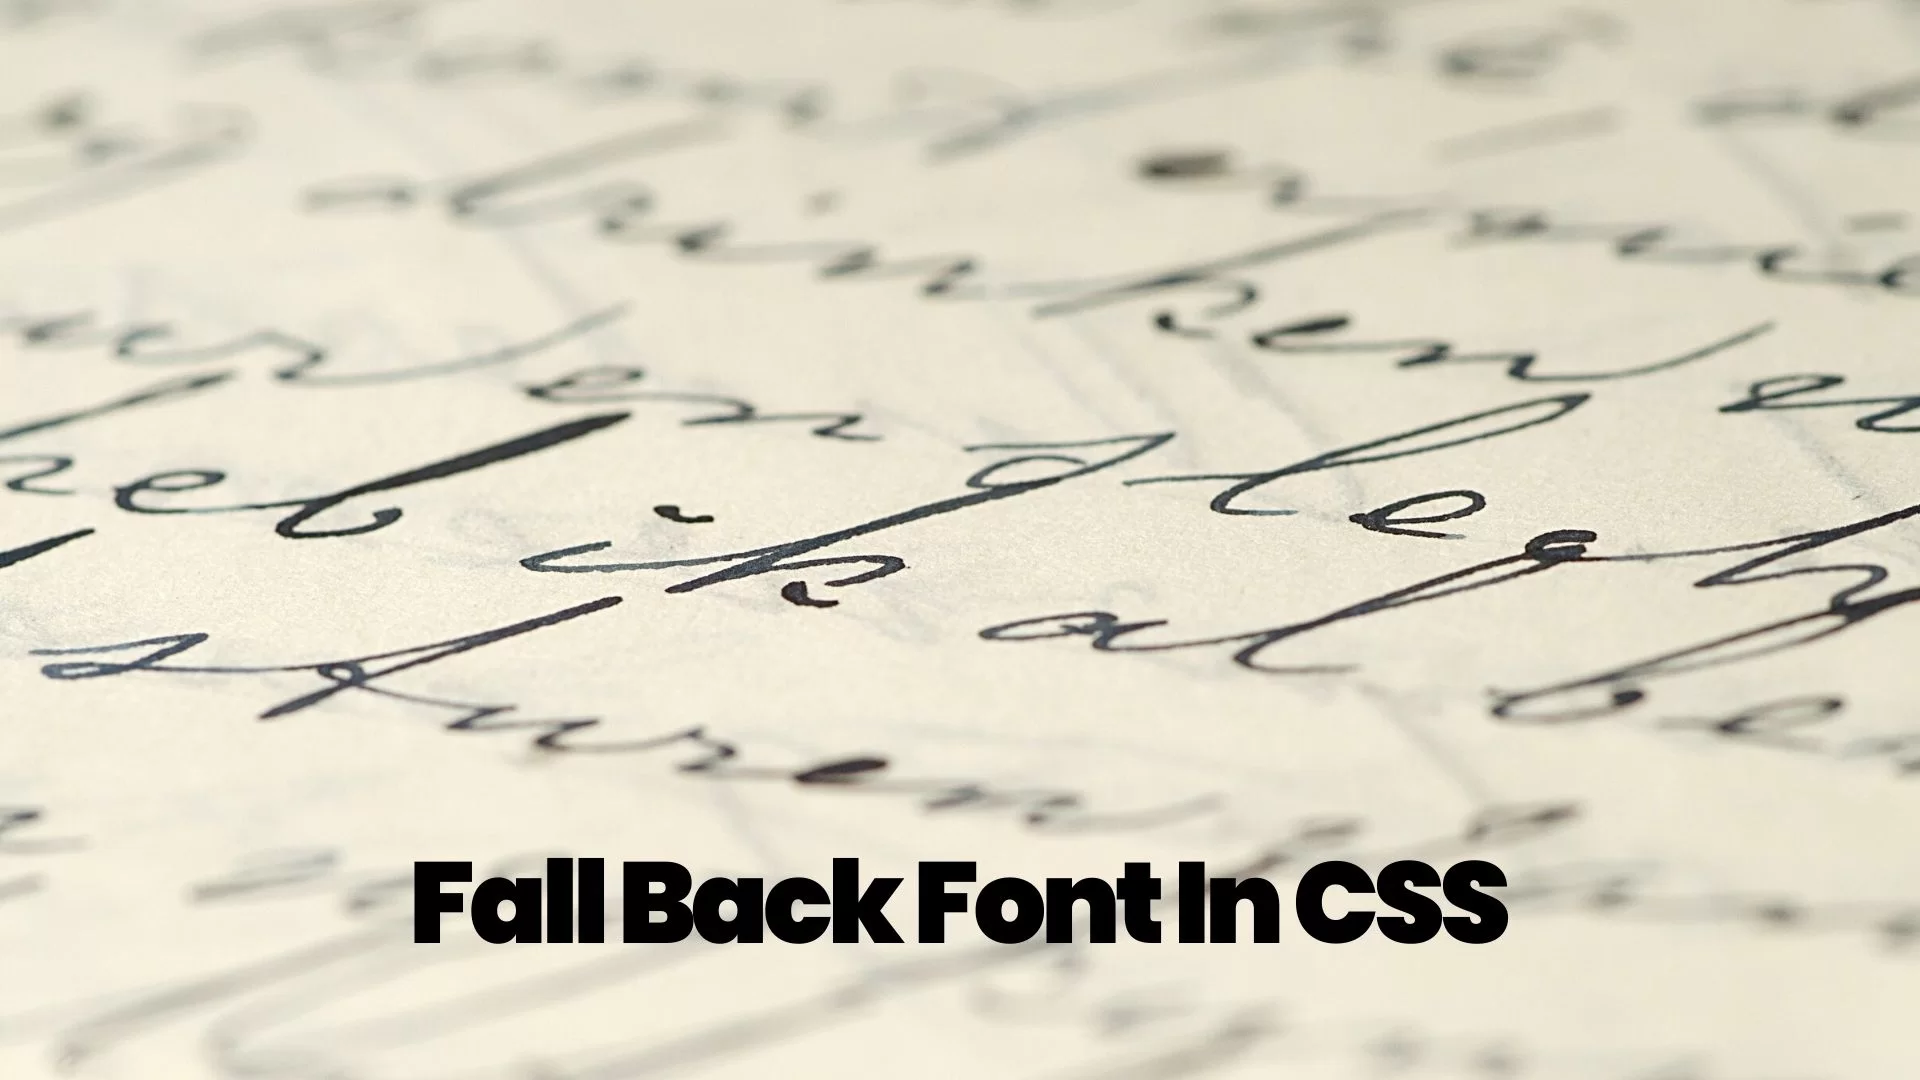 What Is Fall Back Font In CSS?